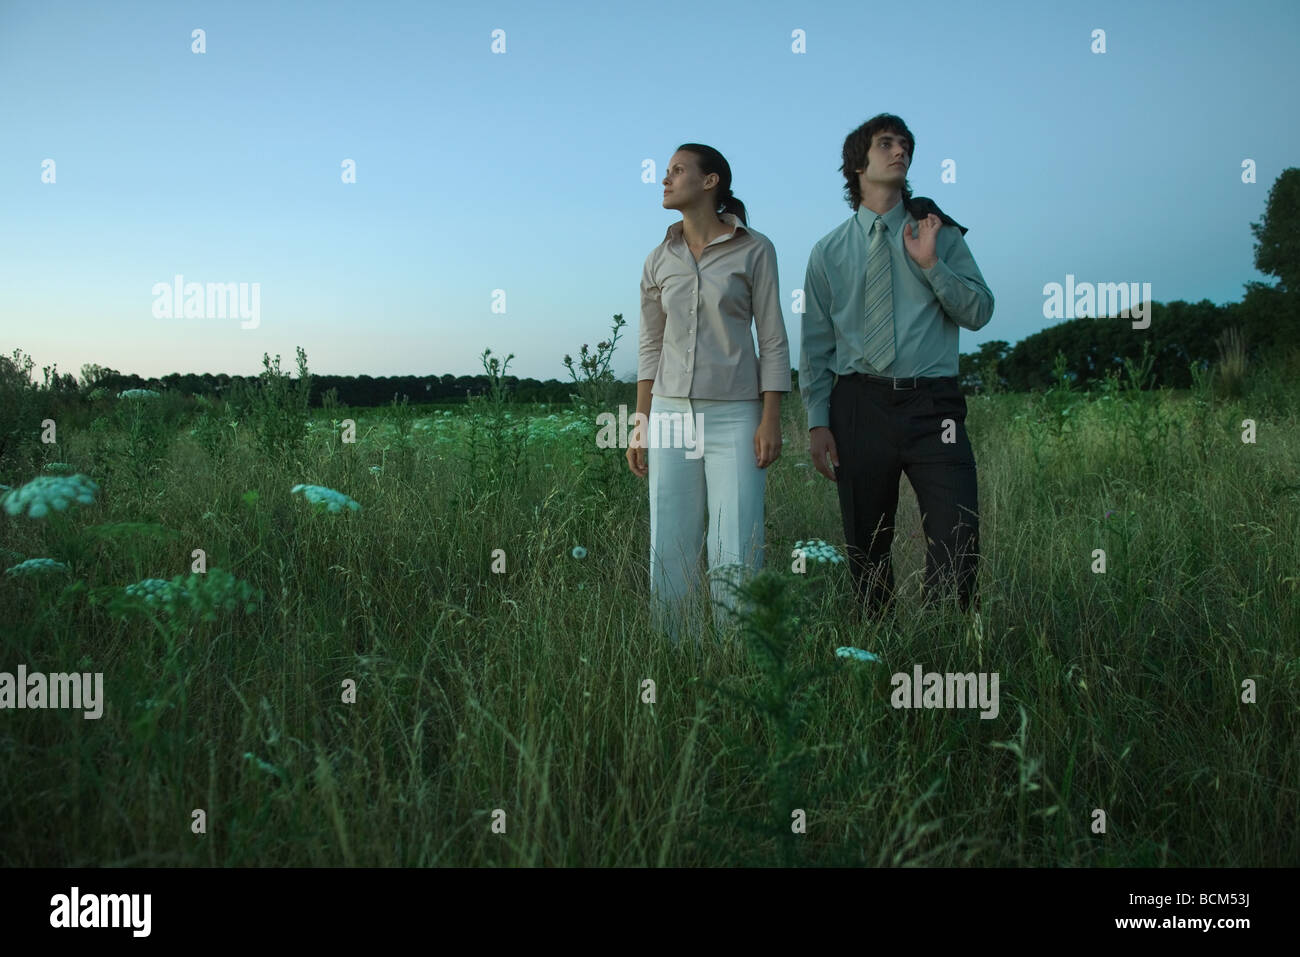 Couple standing in field at dusk, looking in opposite directions Stock Photo